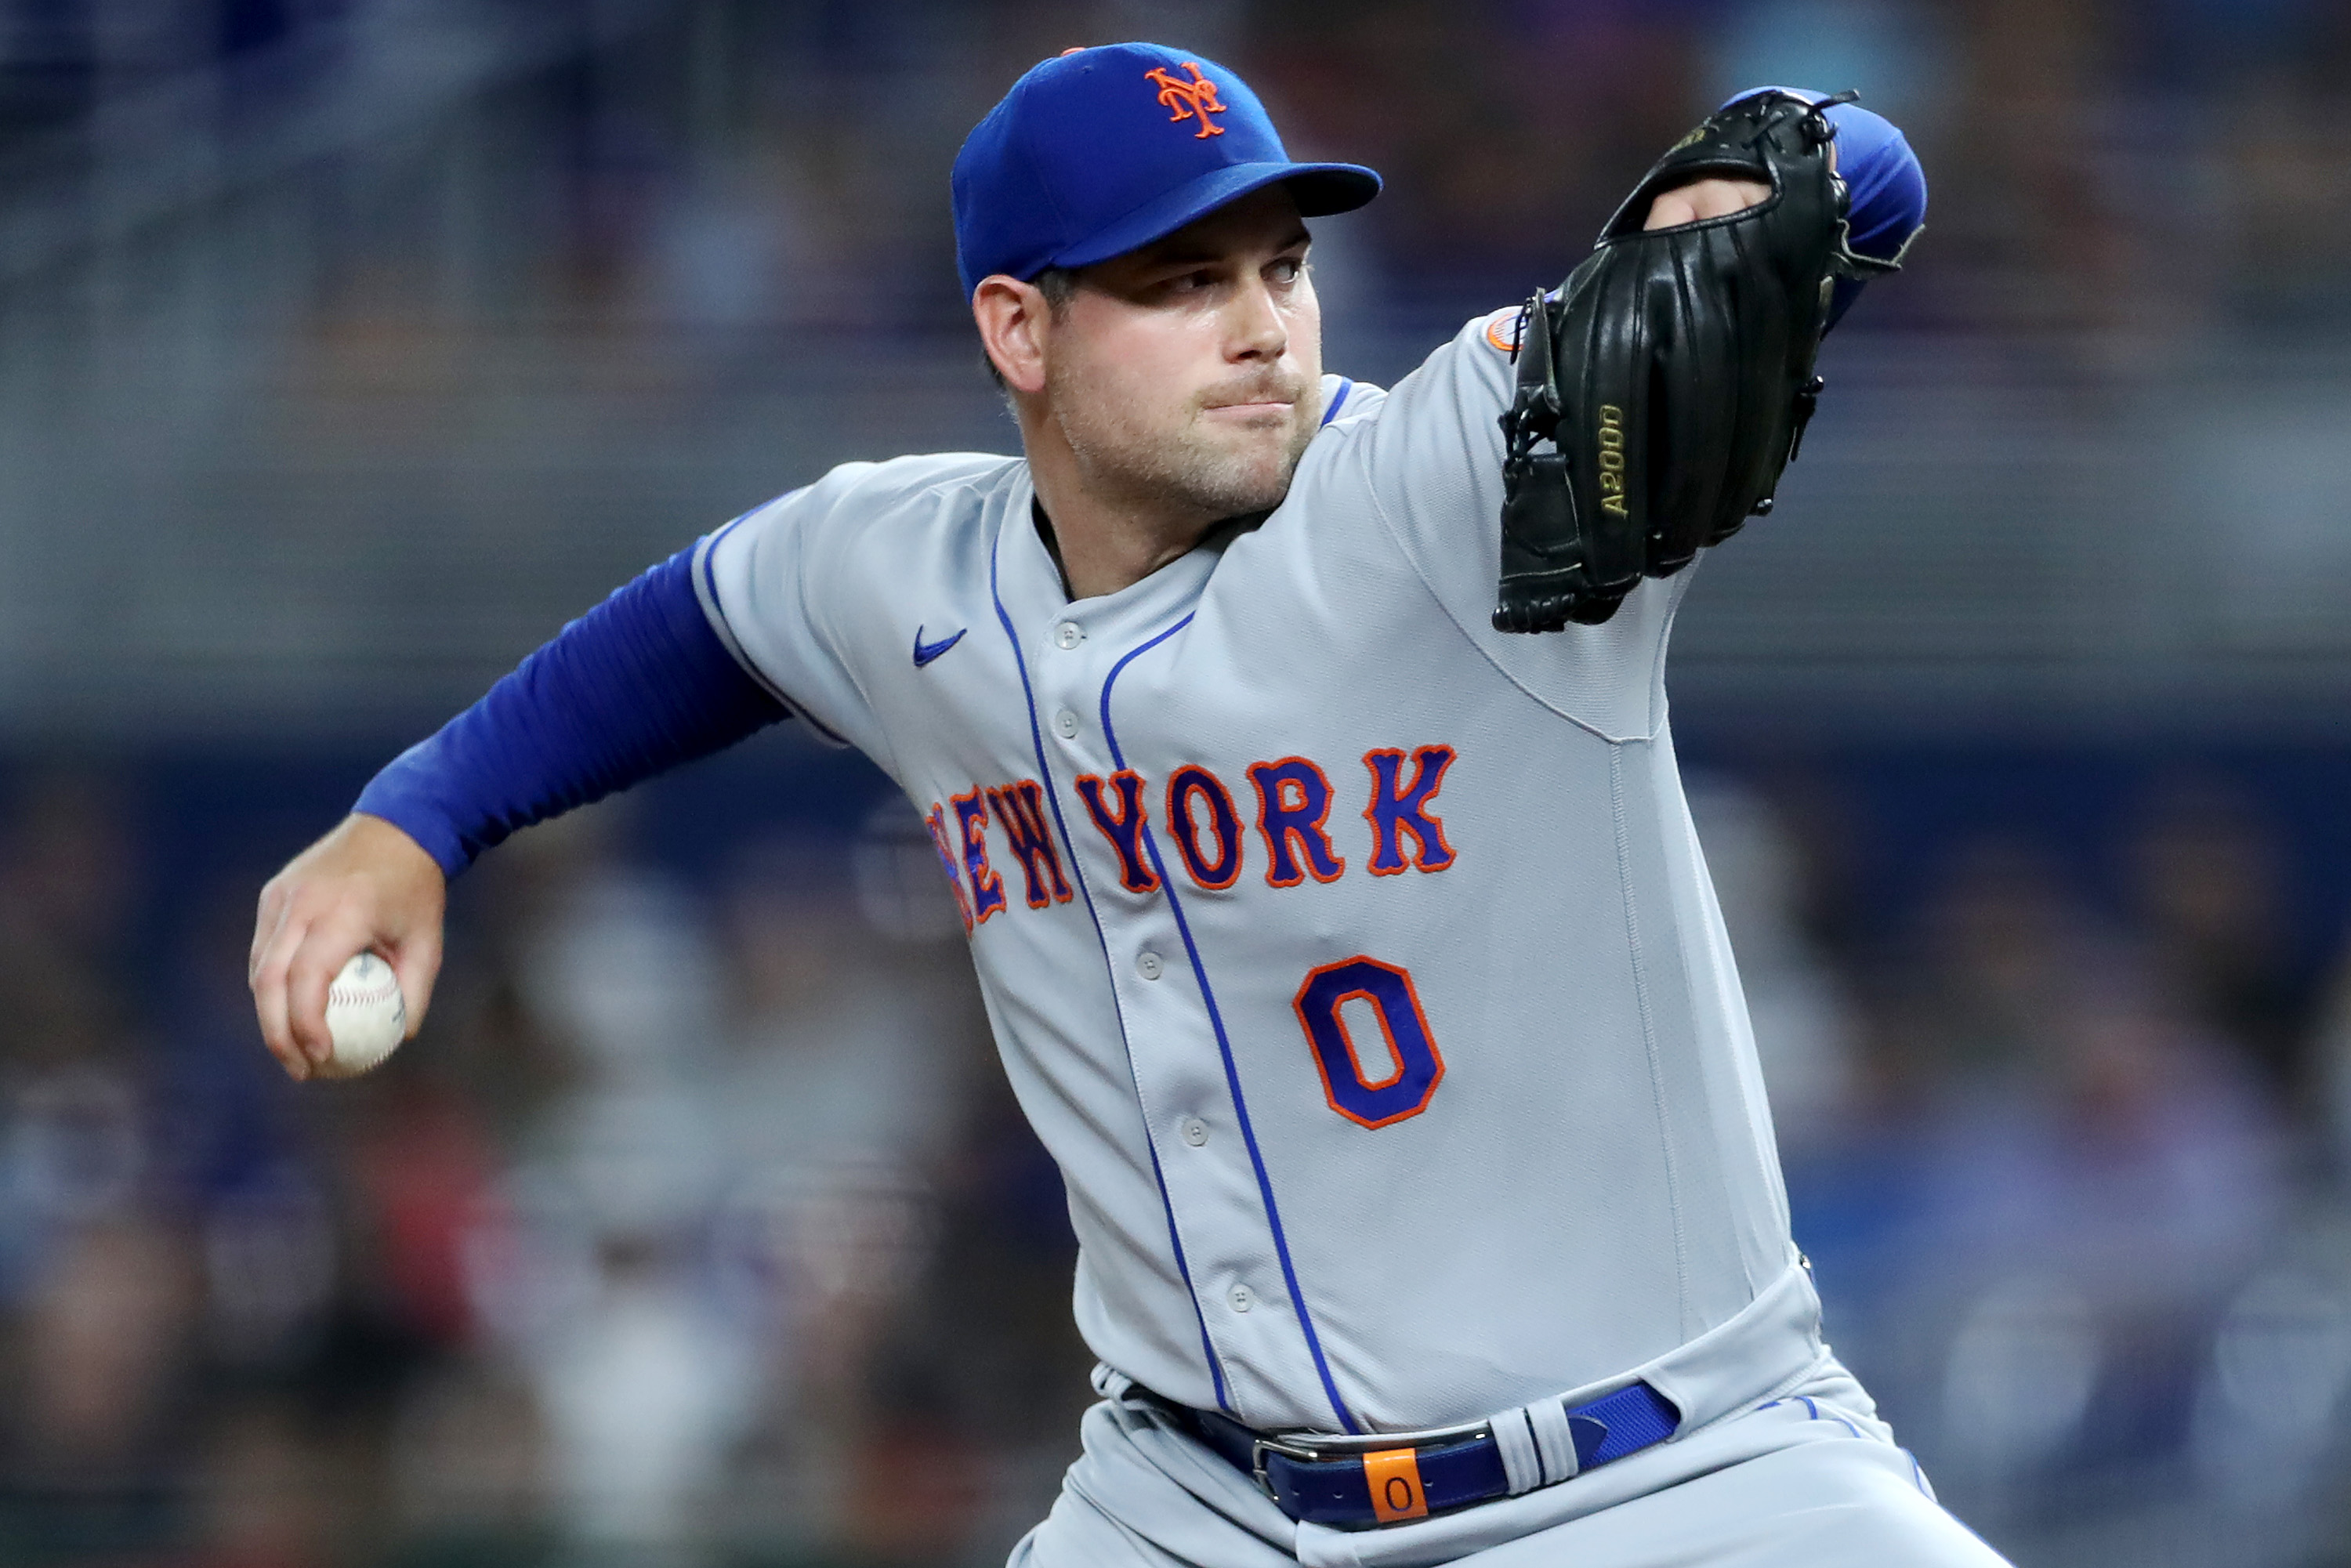 Adam Ottavino throws a pitch for the Mets.